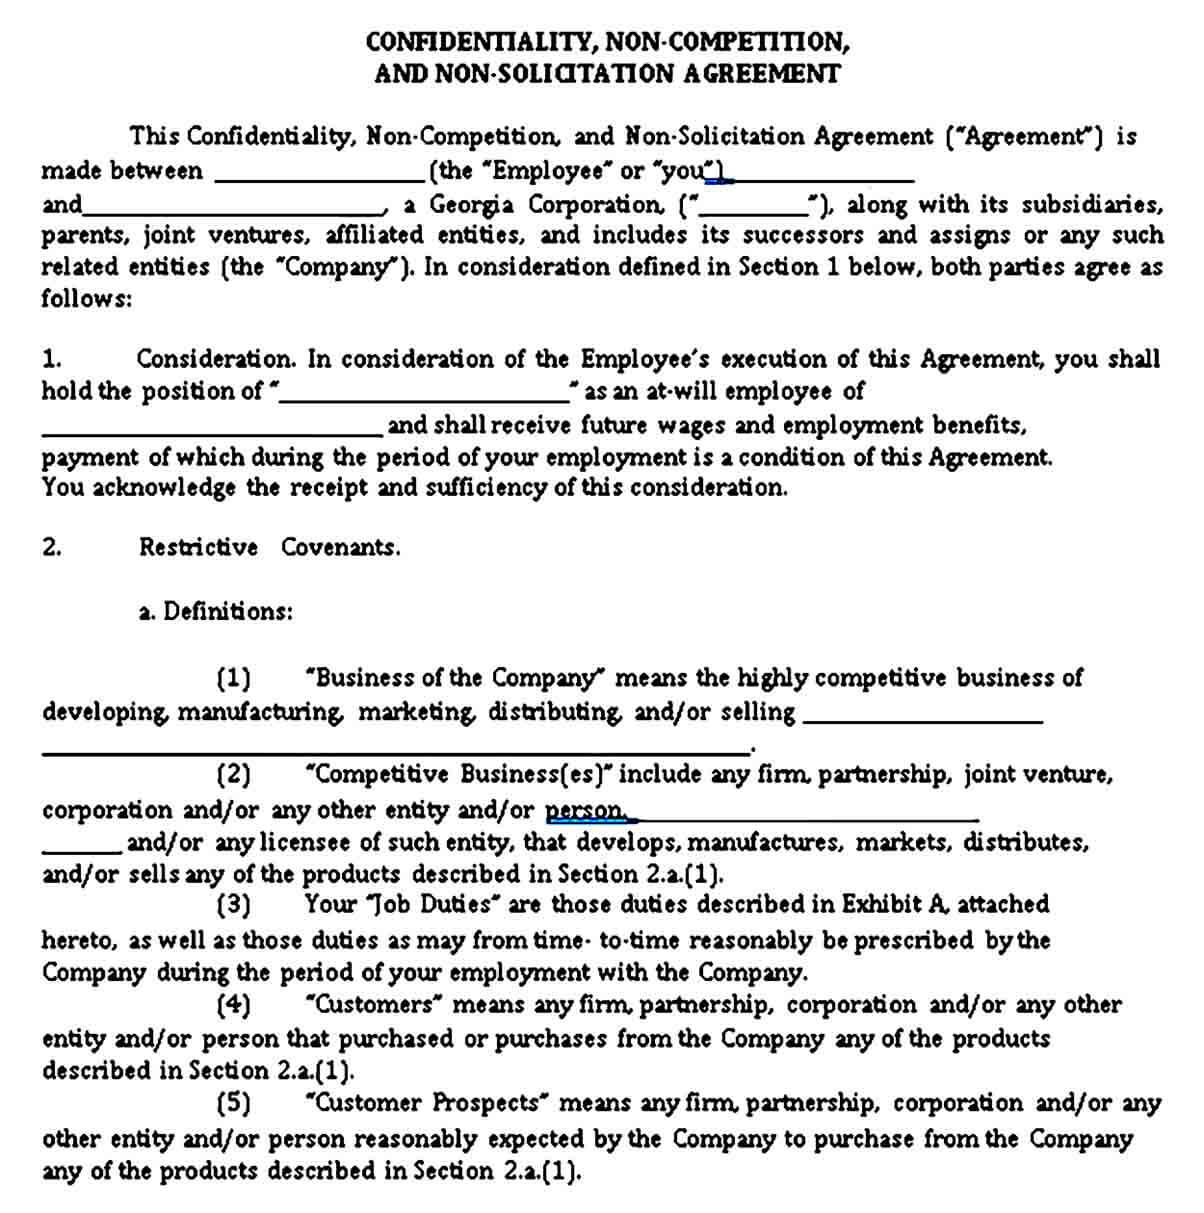 Confidentiality agreement contract sample